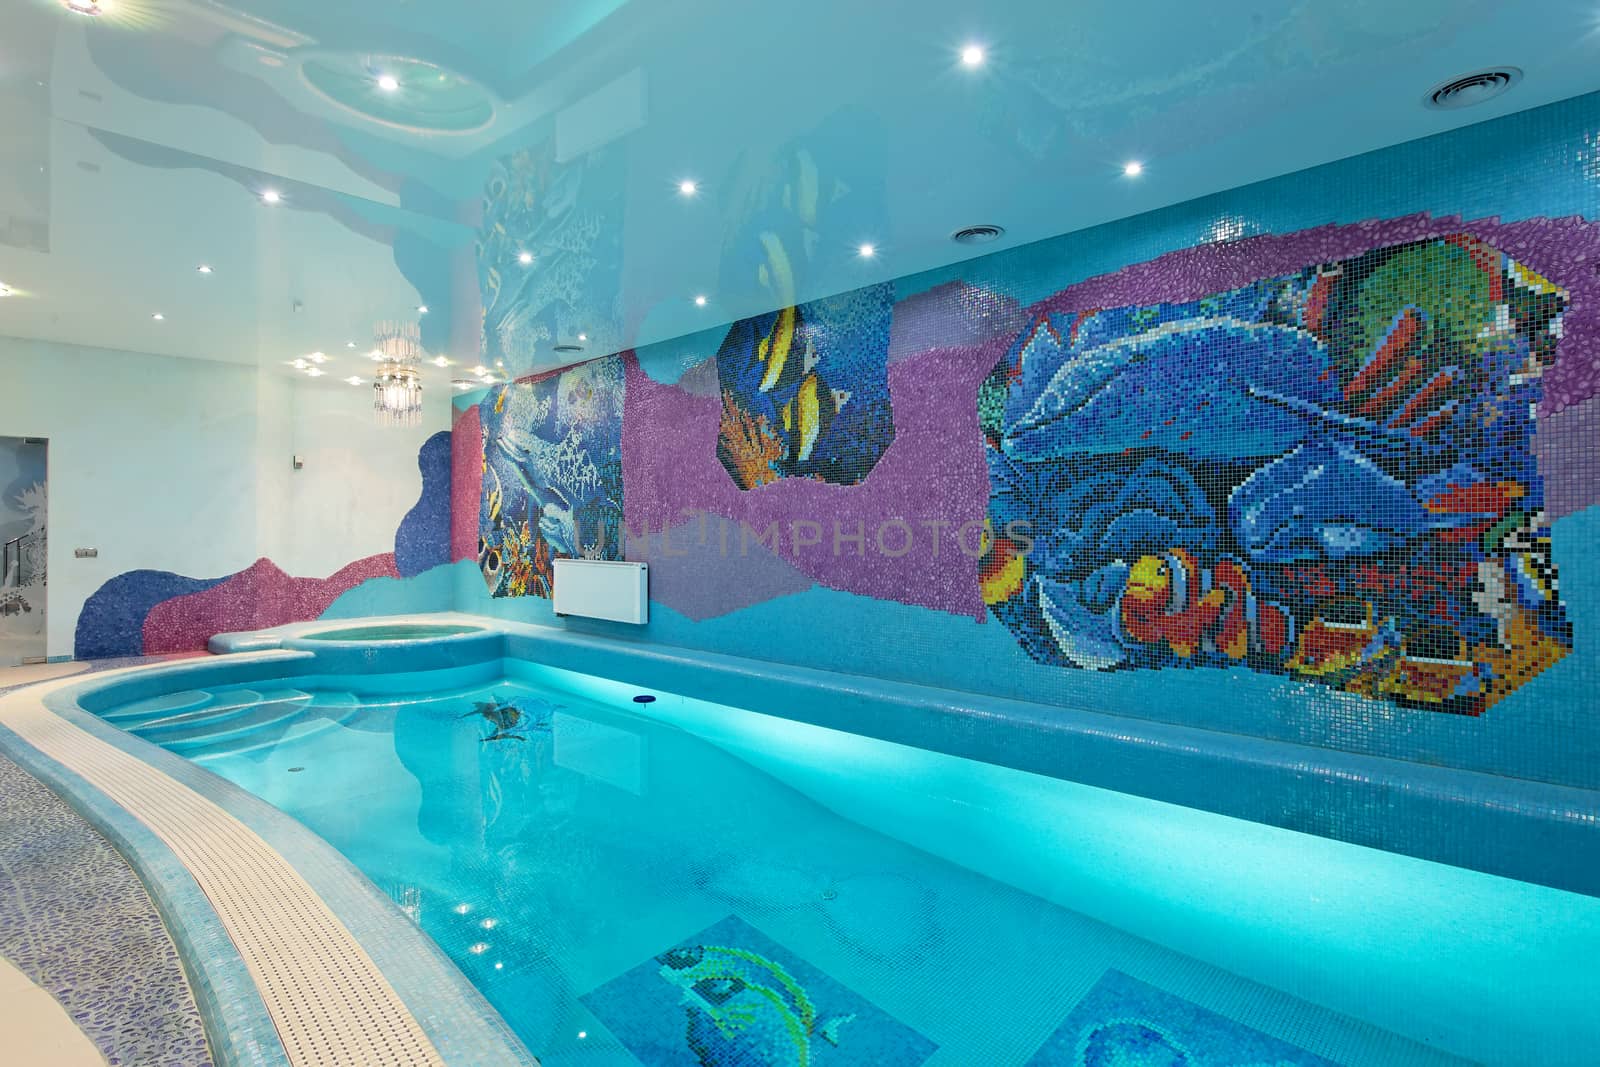 Spa swimming pool design with mosaic fish on the wall and blue mosaic